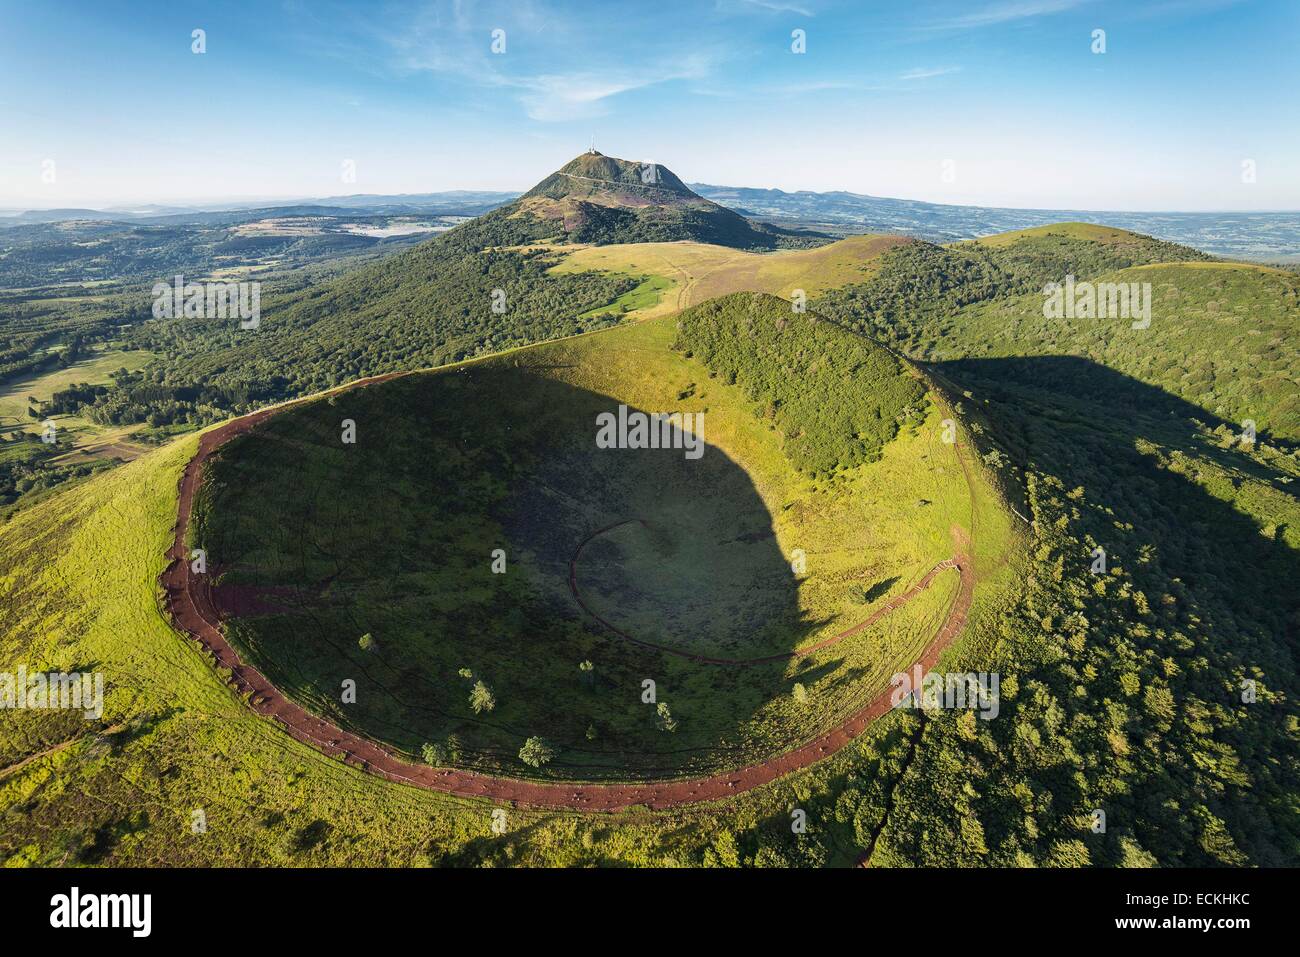 France, Puy de Dome, the Regional Natural Park of the Volcanoes of Auvergne, Chaine des Puys, Orcines, the crater of Puy Pariou volcano, the Puy de Dome volcano in the background (aerial view) Stock Photo